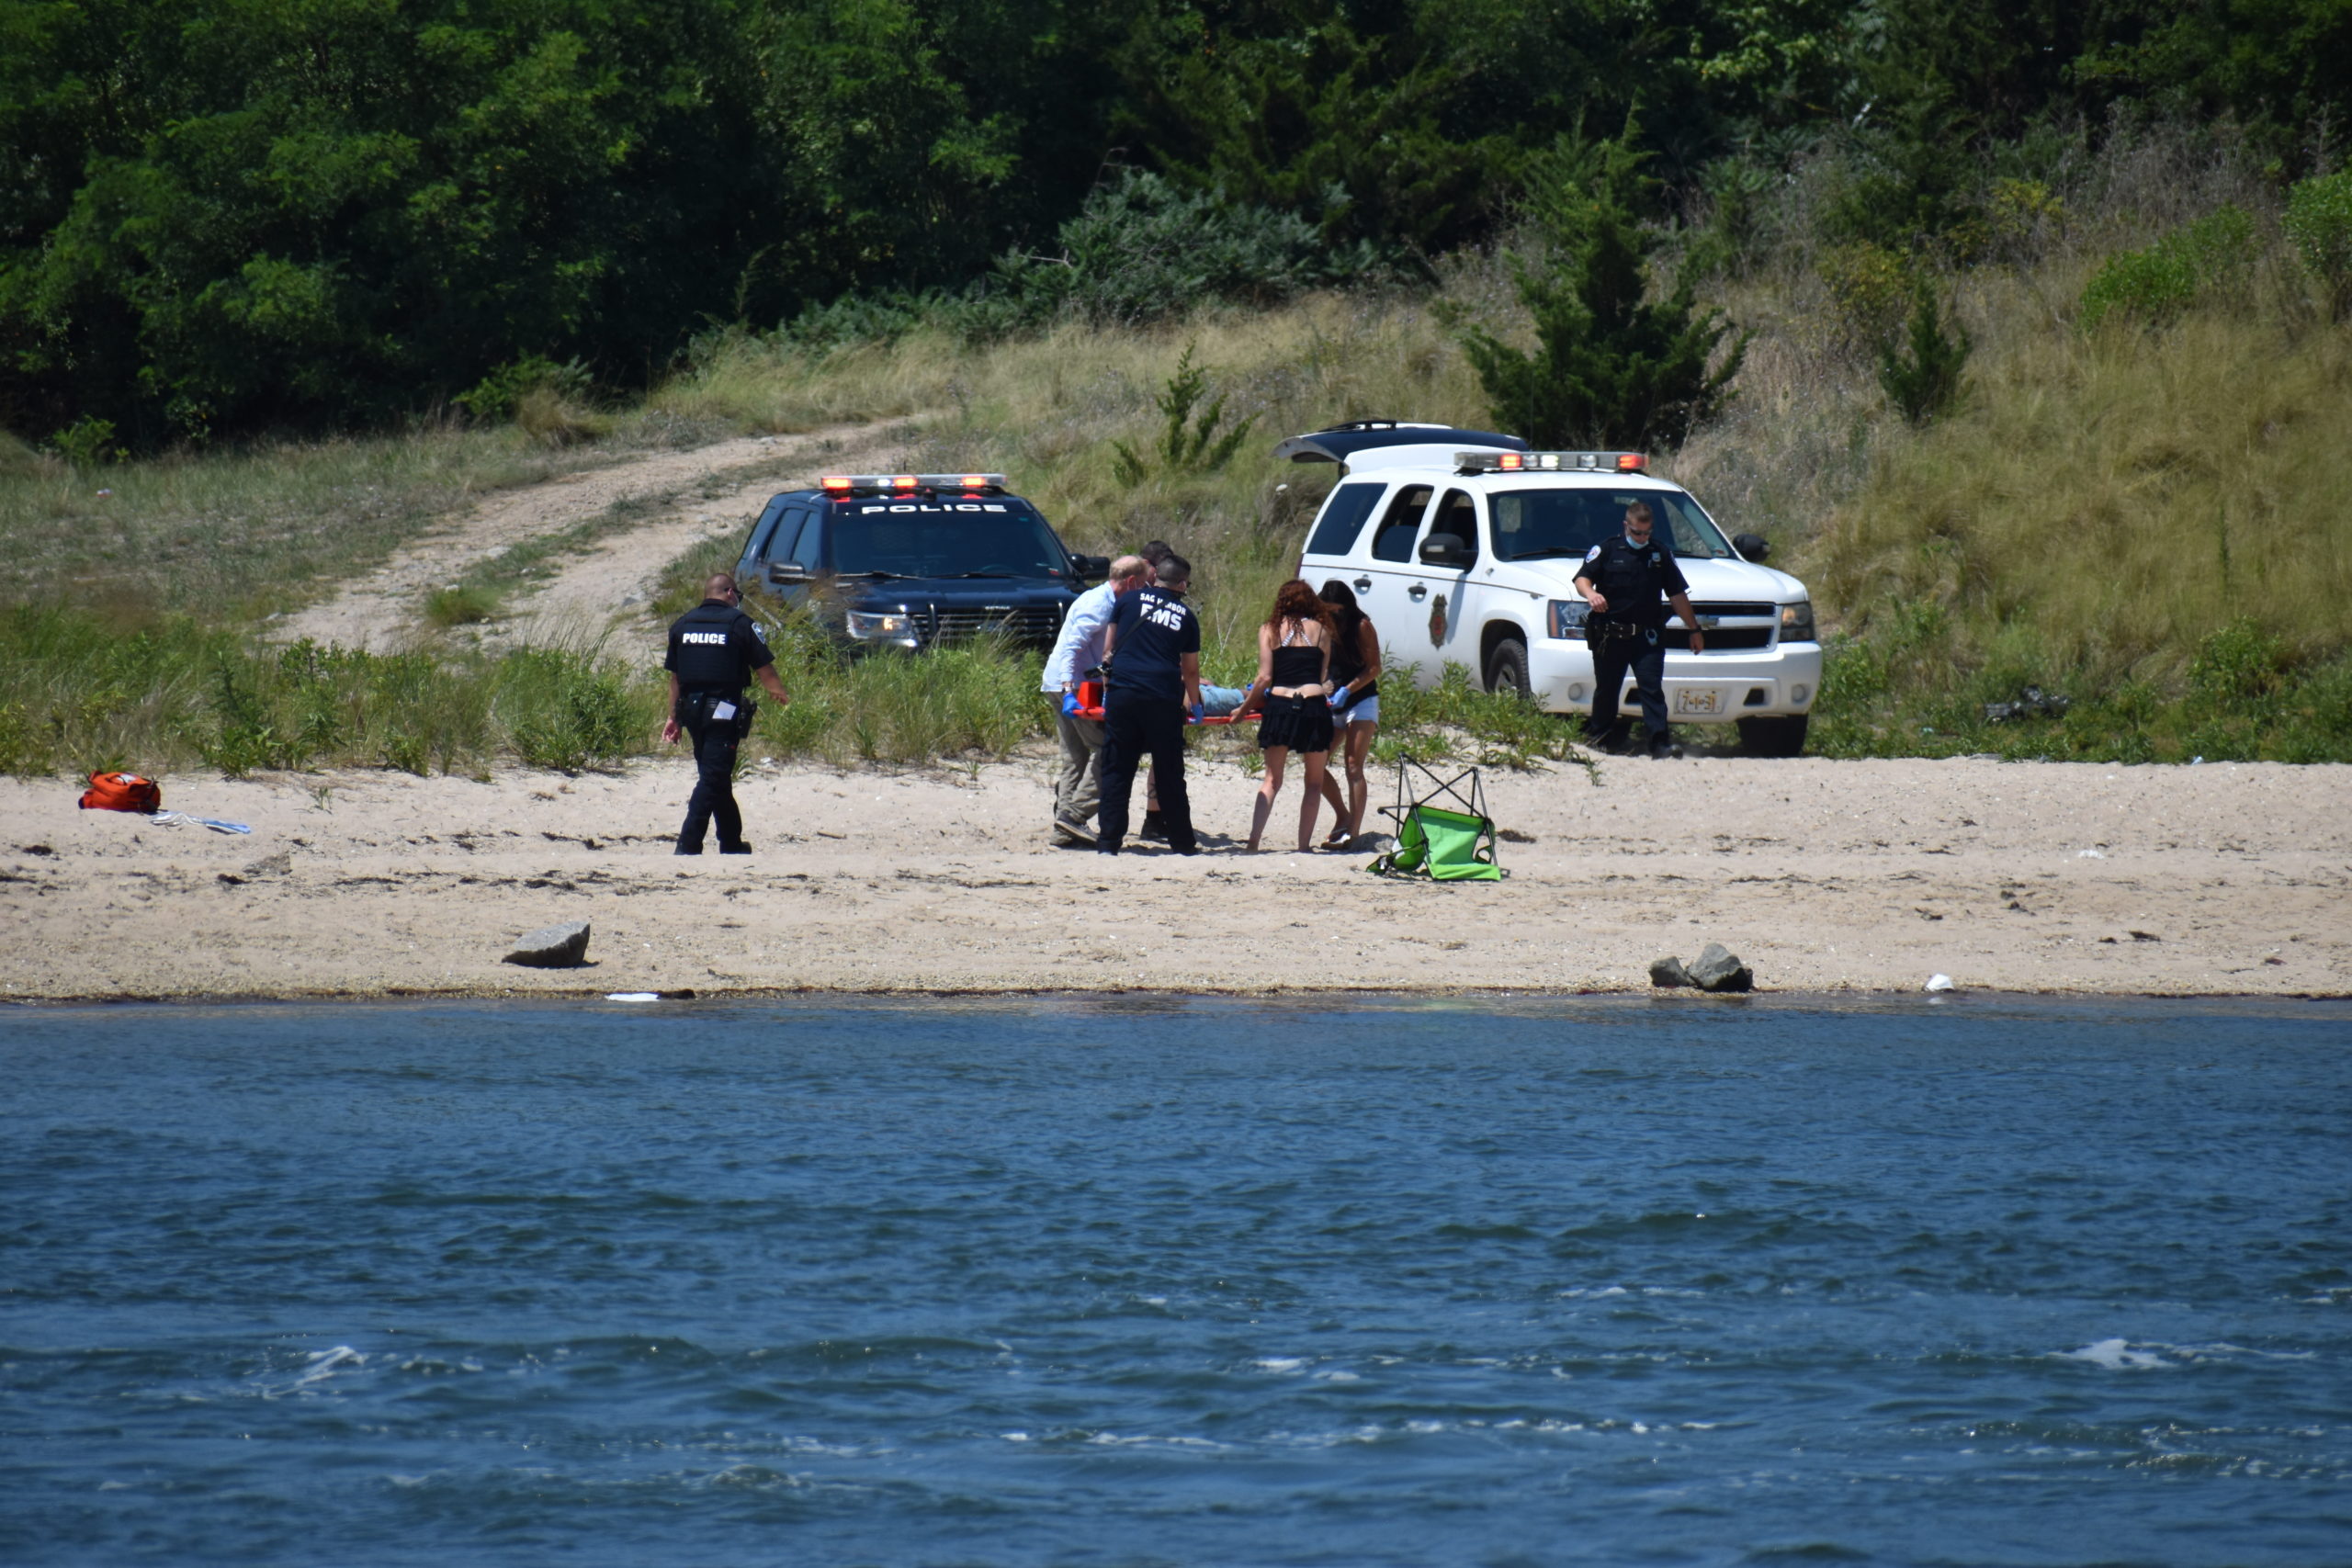 First responders pulled three swimmers from the water near North Haven Bridge Sunday. STEPHEN KOTZ